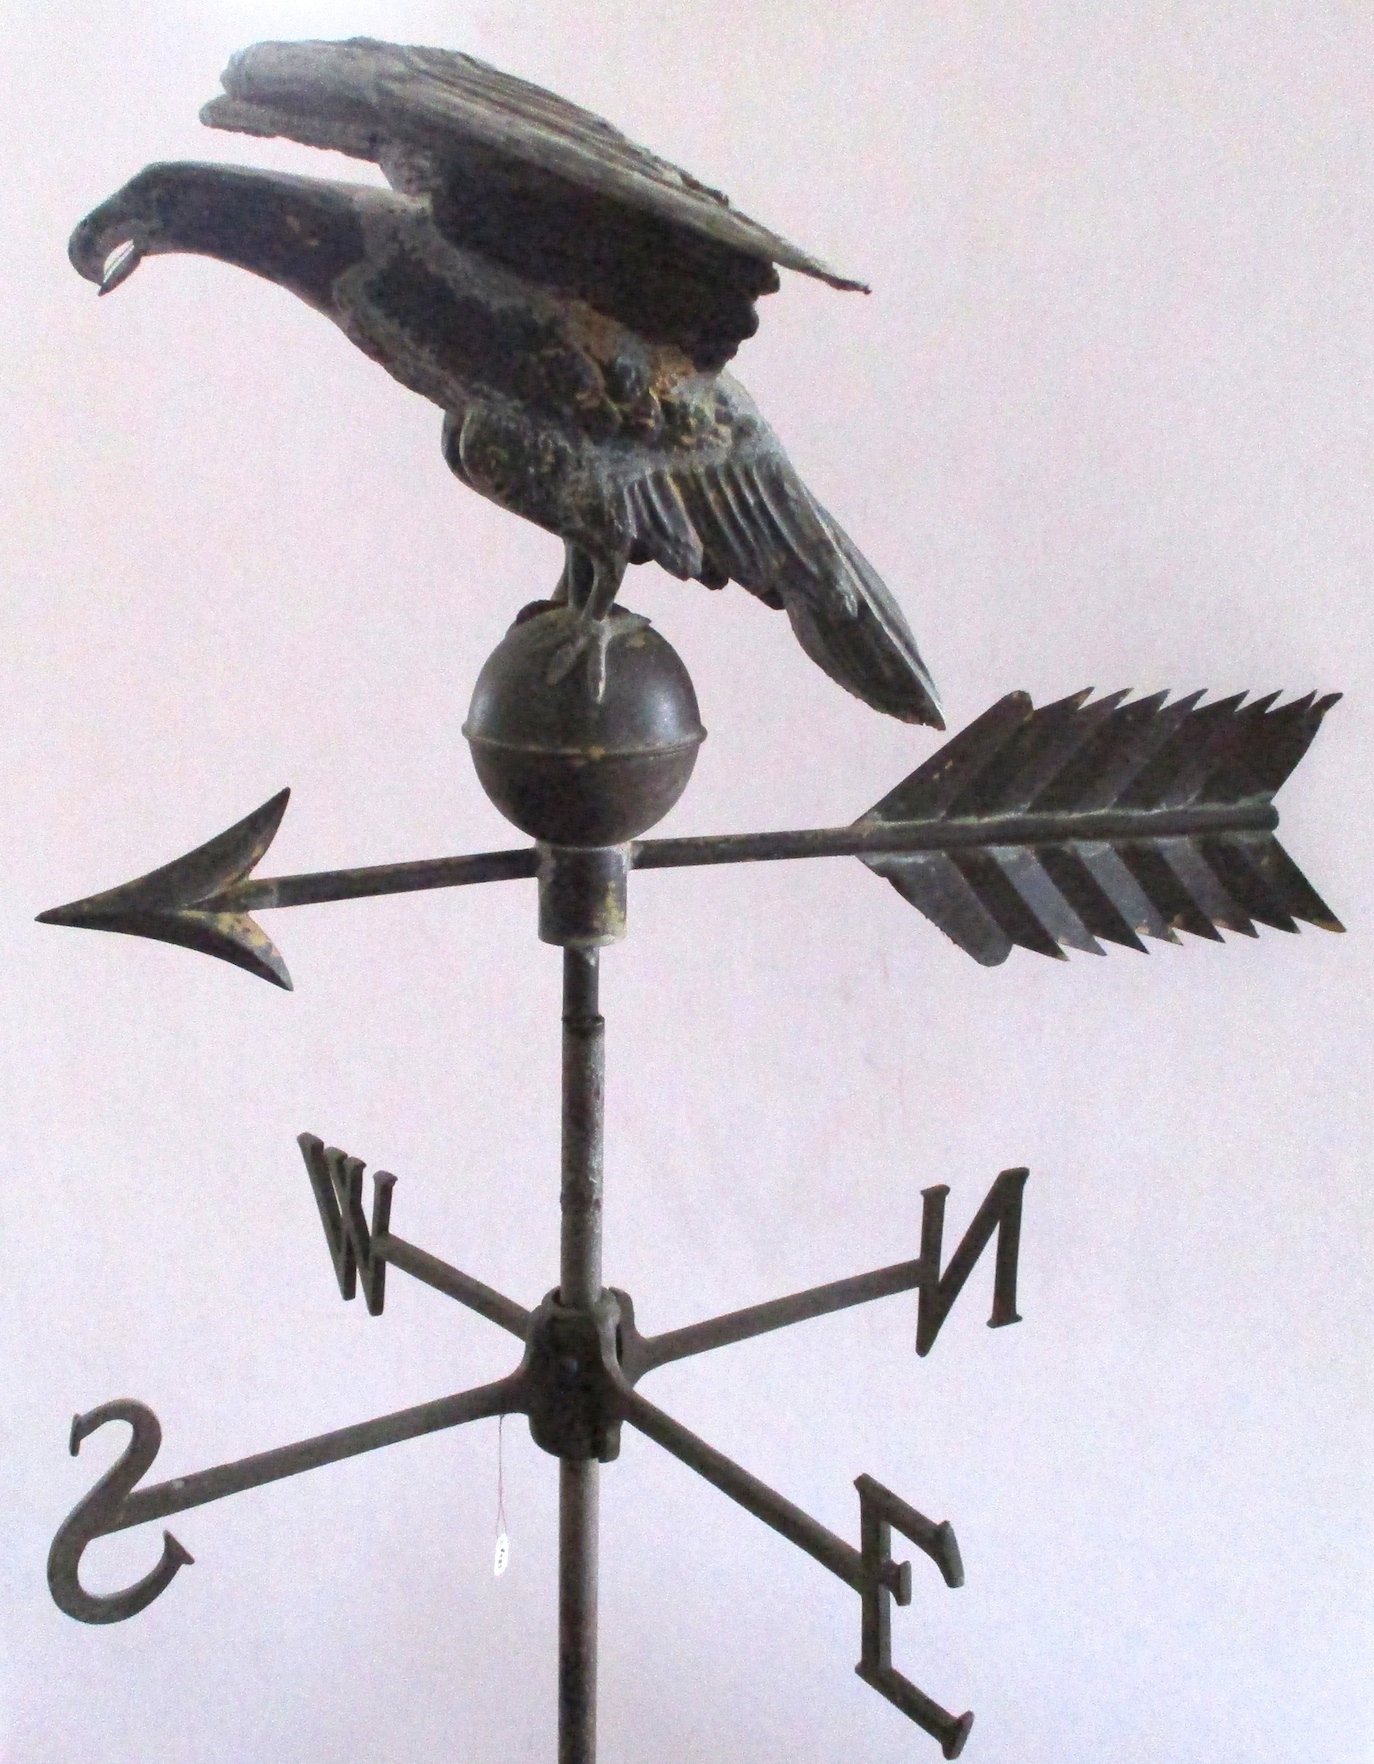 19th Century Copper & Zinc Eagle Weather Vane (27" Wing Span) w/Traces of Original Gold Leaf